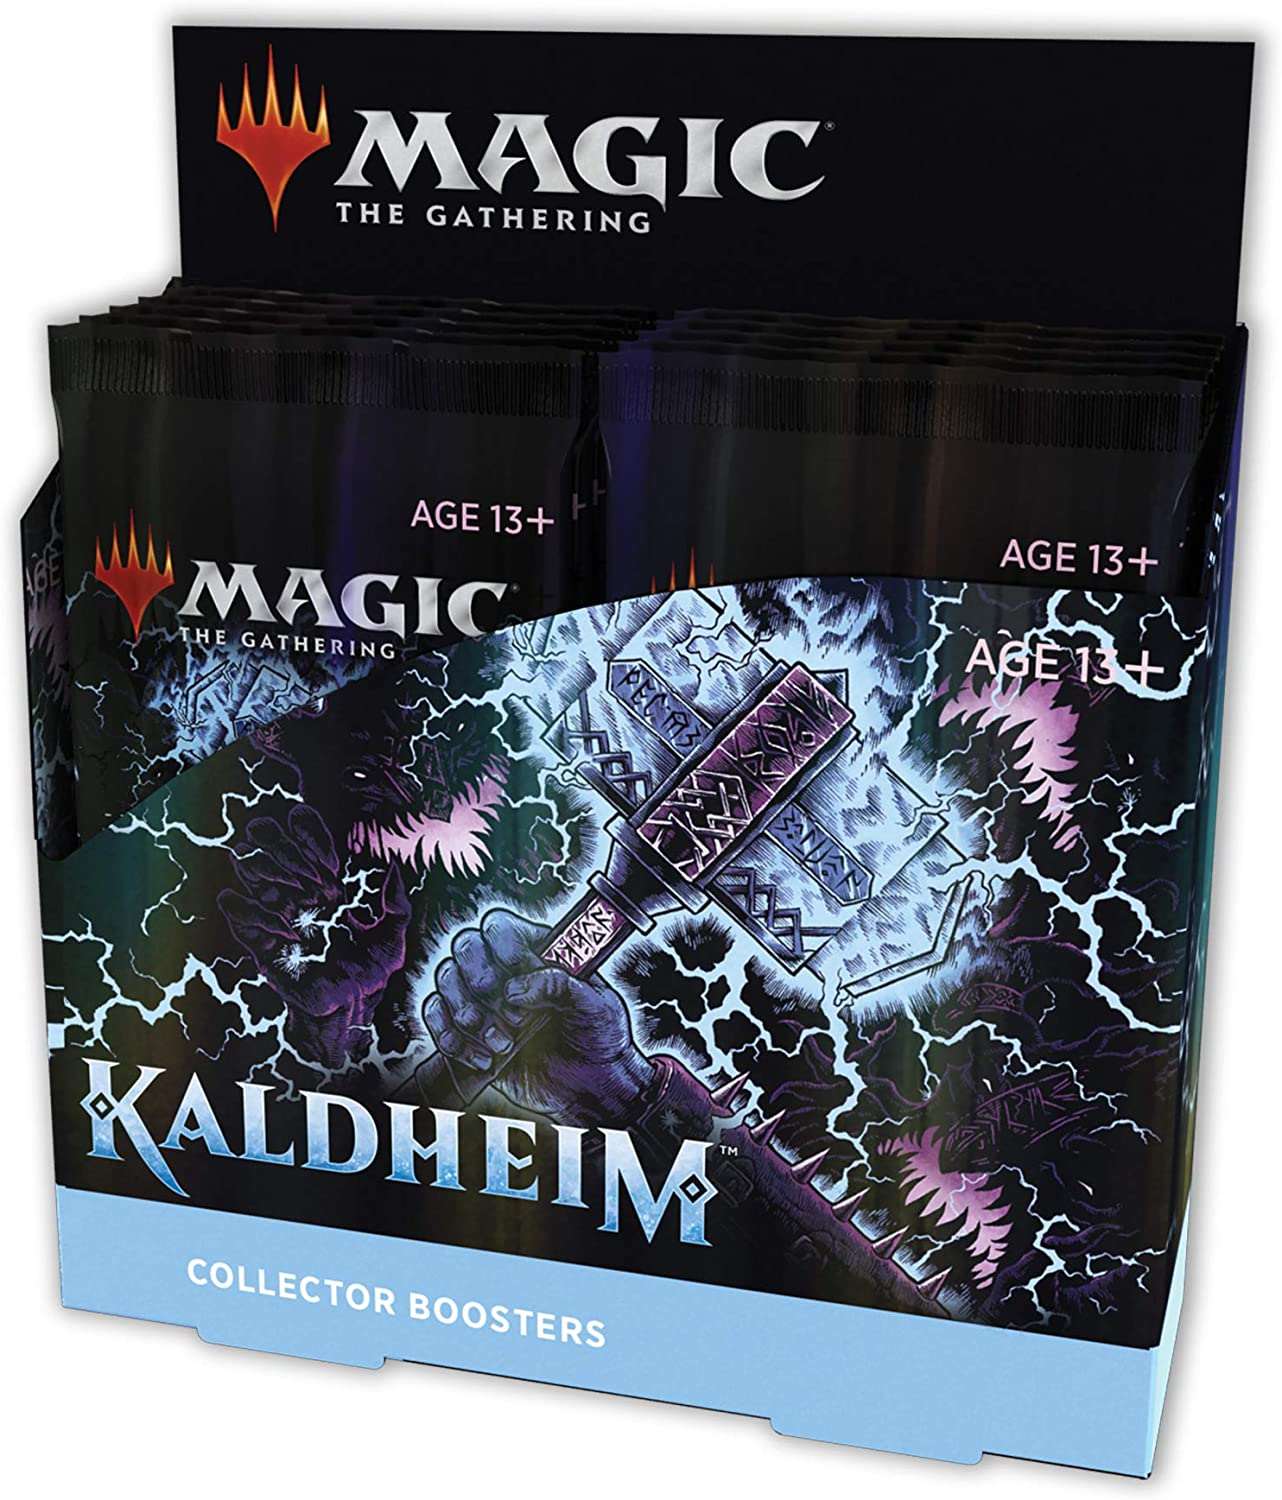 Magic The Gathering: Kaldheim Collector Booster Box, Wizards of the Coast, Magic the Gathering Sealed, magic-the-gathering-kaldheim-collector-booster-box, Booster Box, Kaldheim, MTG Sealed, Dark Ninja Gaming LA